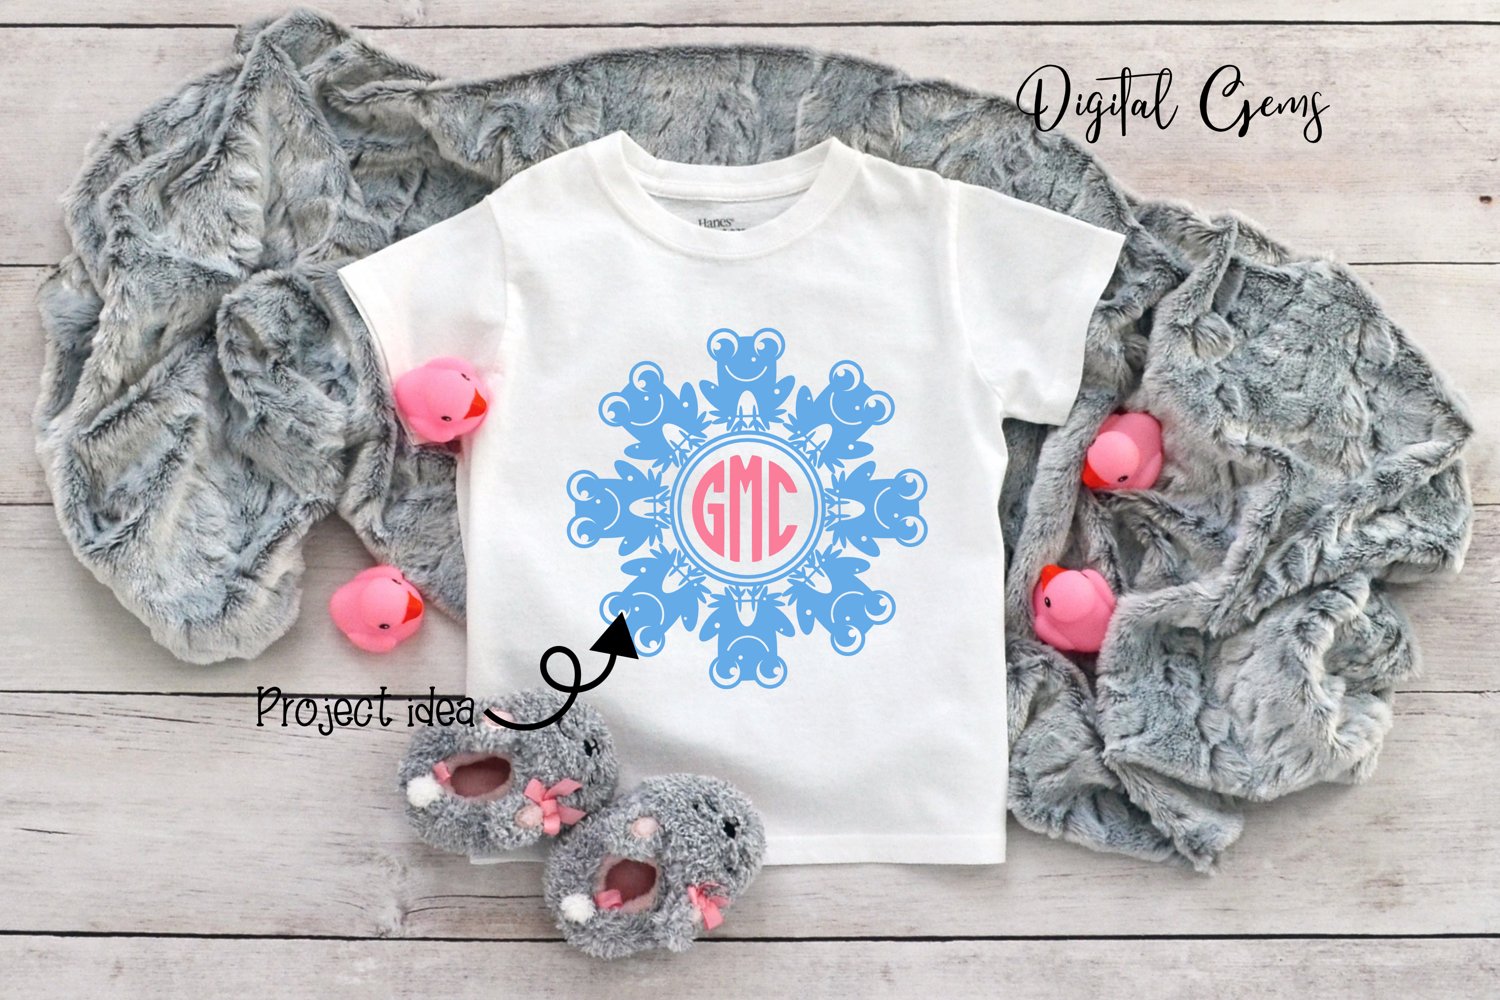 White shirt with a monogrammed snowflake on it.